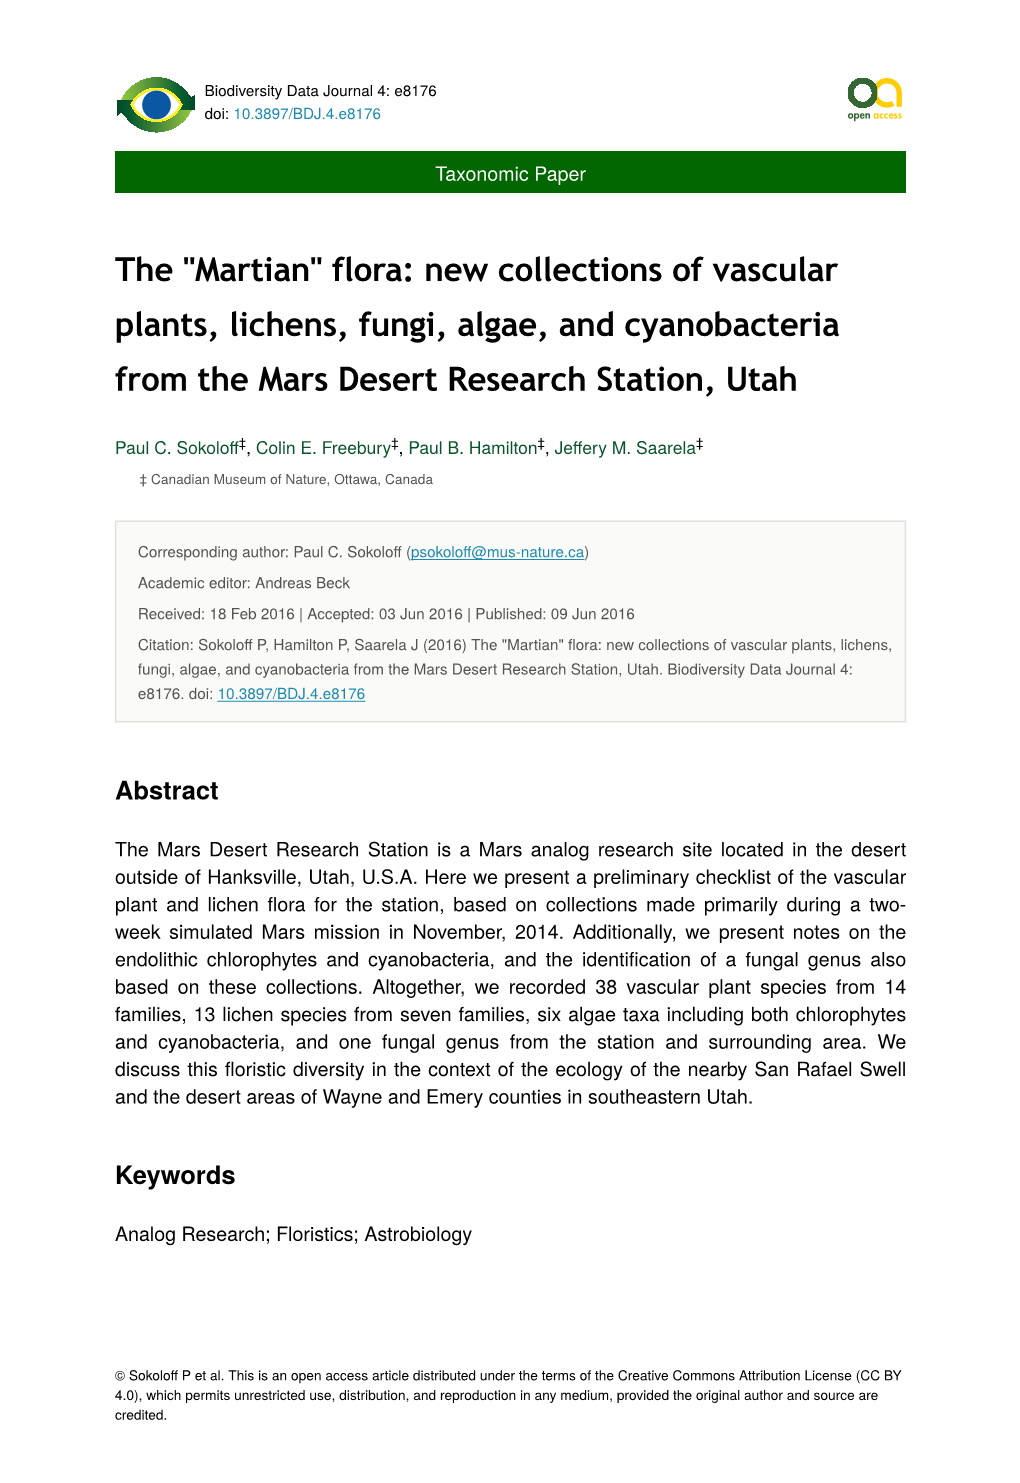 The "Martian" Flora: New Collections of Vascular Plants, Lichens, Fungi, Algae, and Cyanobacteria from the Mars Desert Research Station, Utah